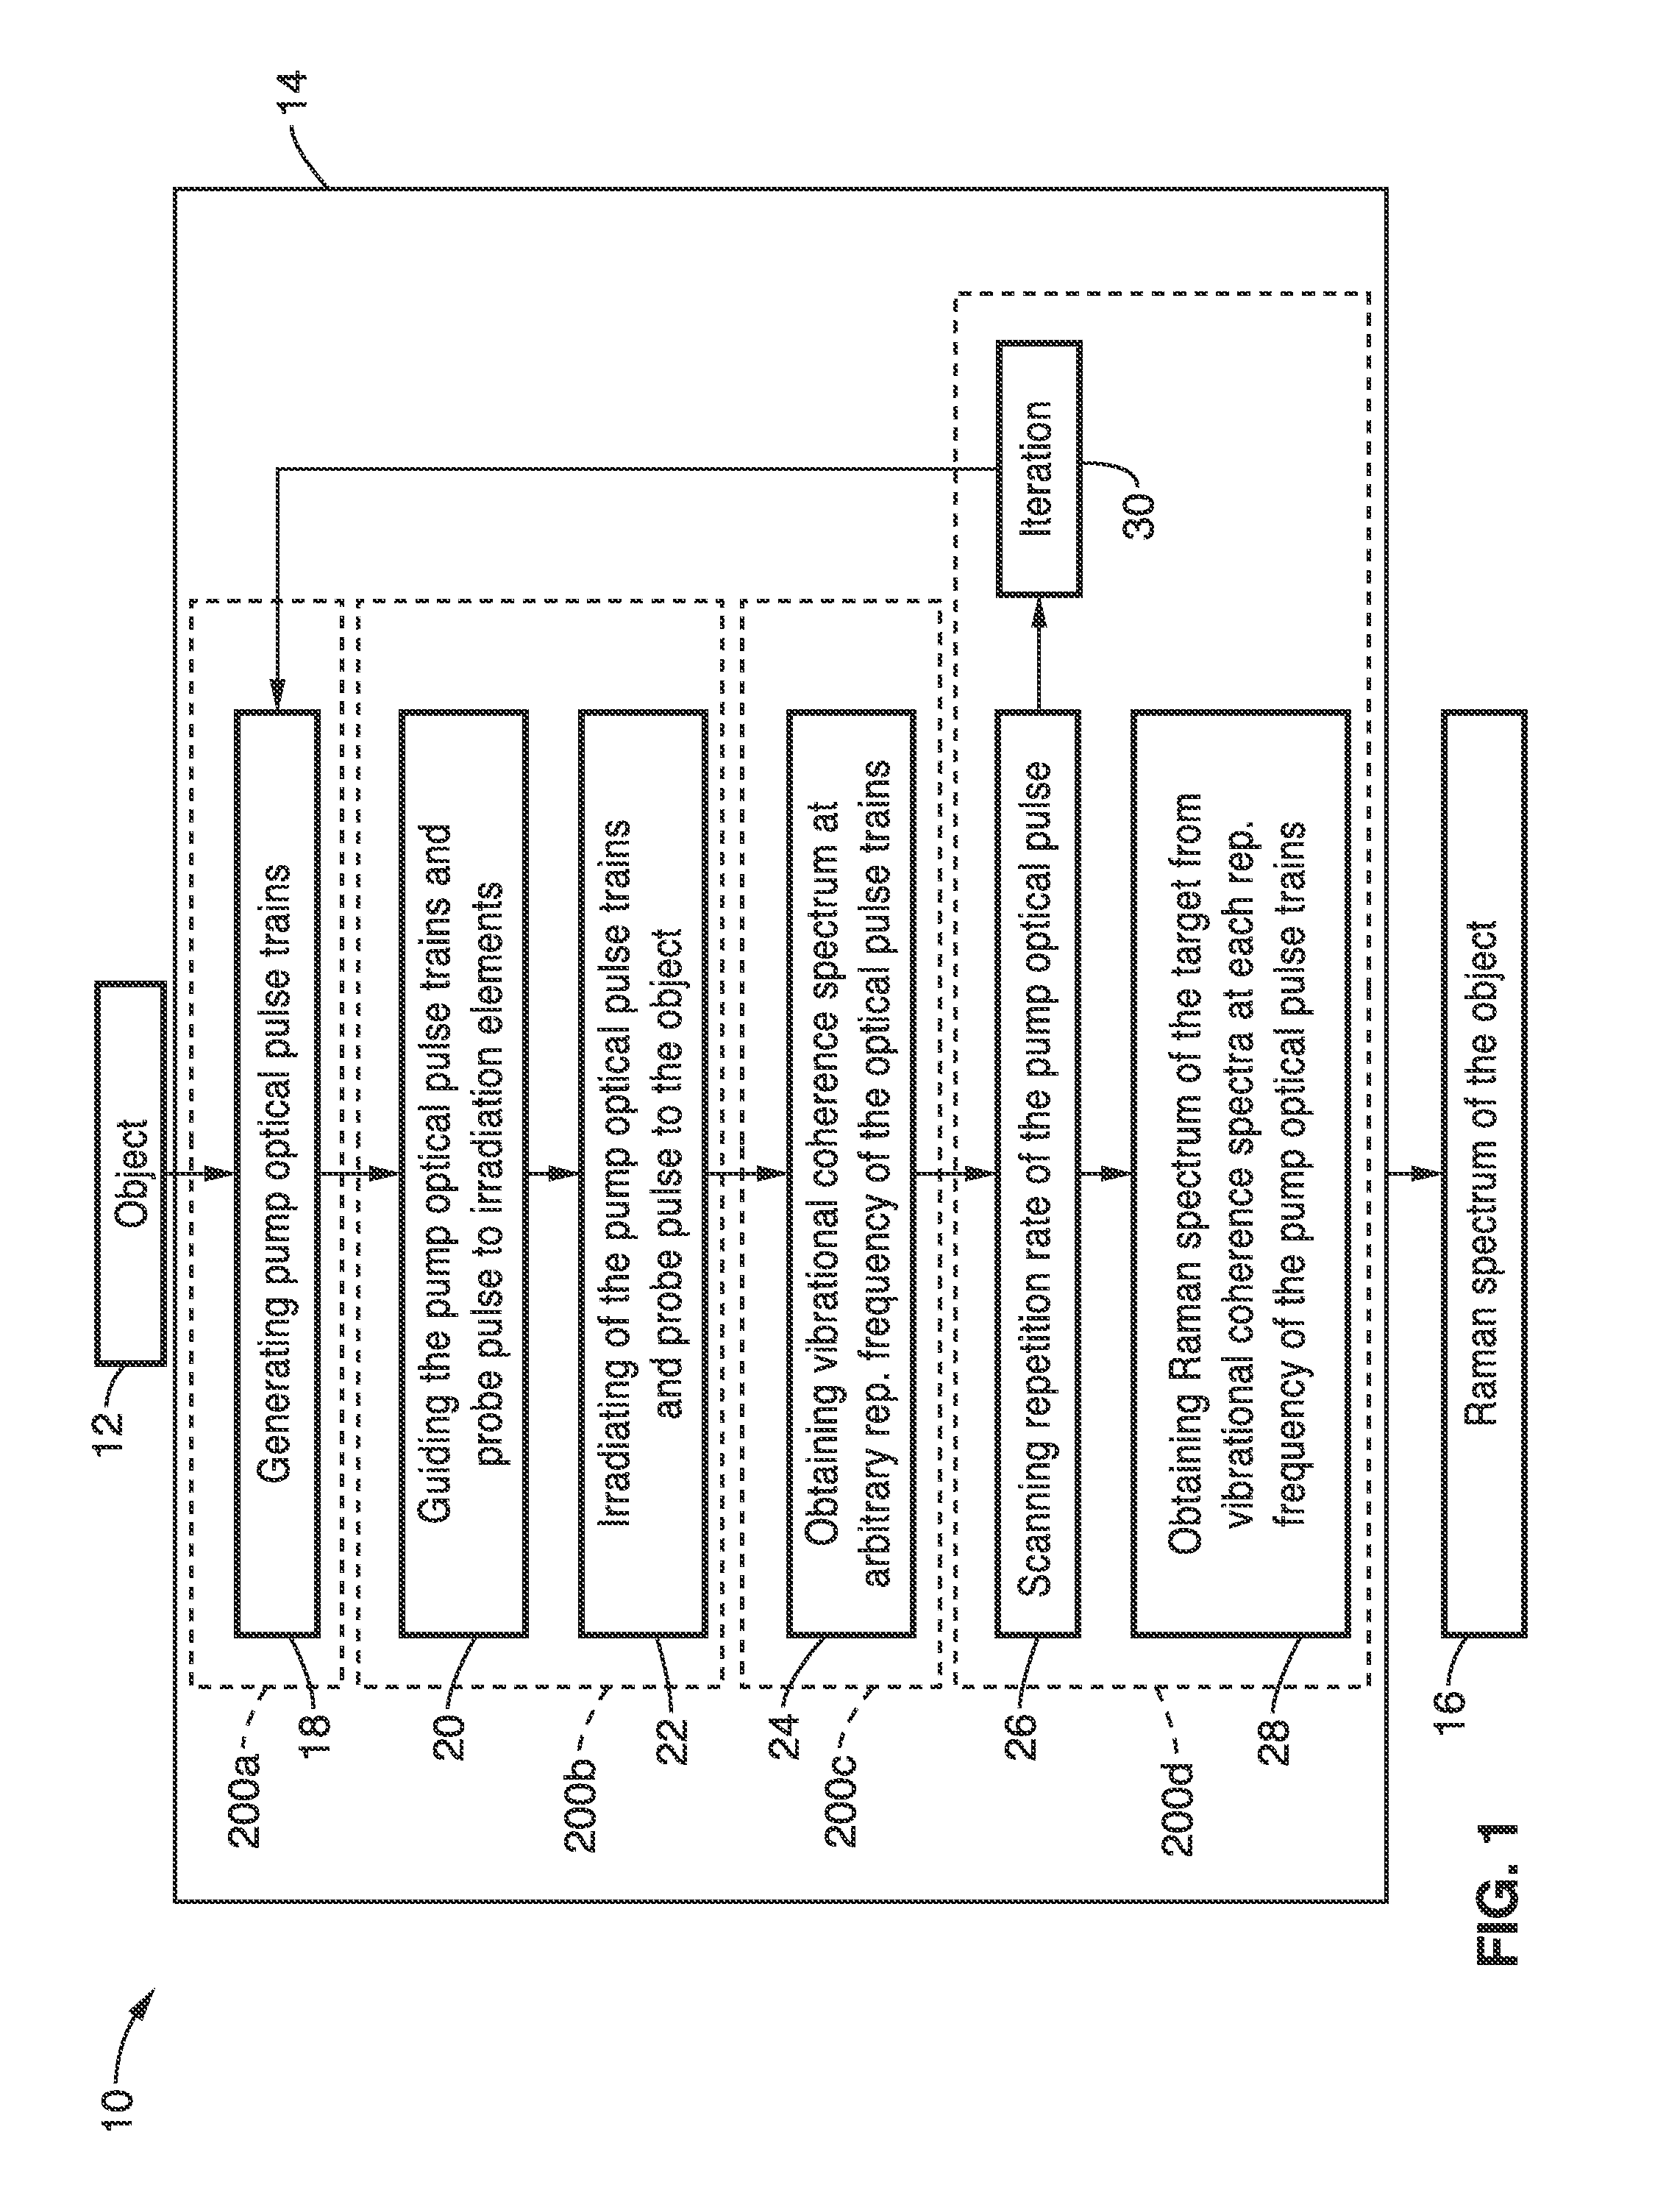 Apparatus and method for multiple-pulse impulsive stimulated raman spectroscopy